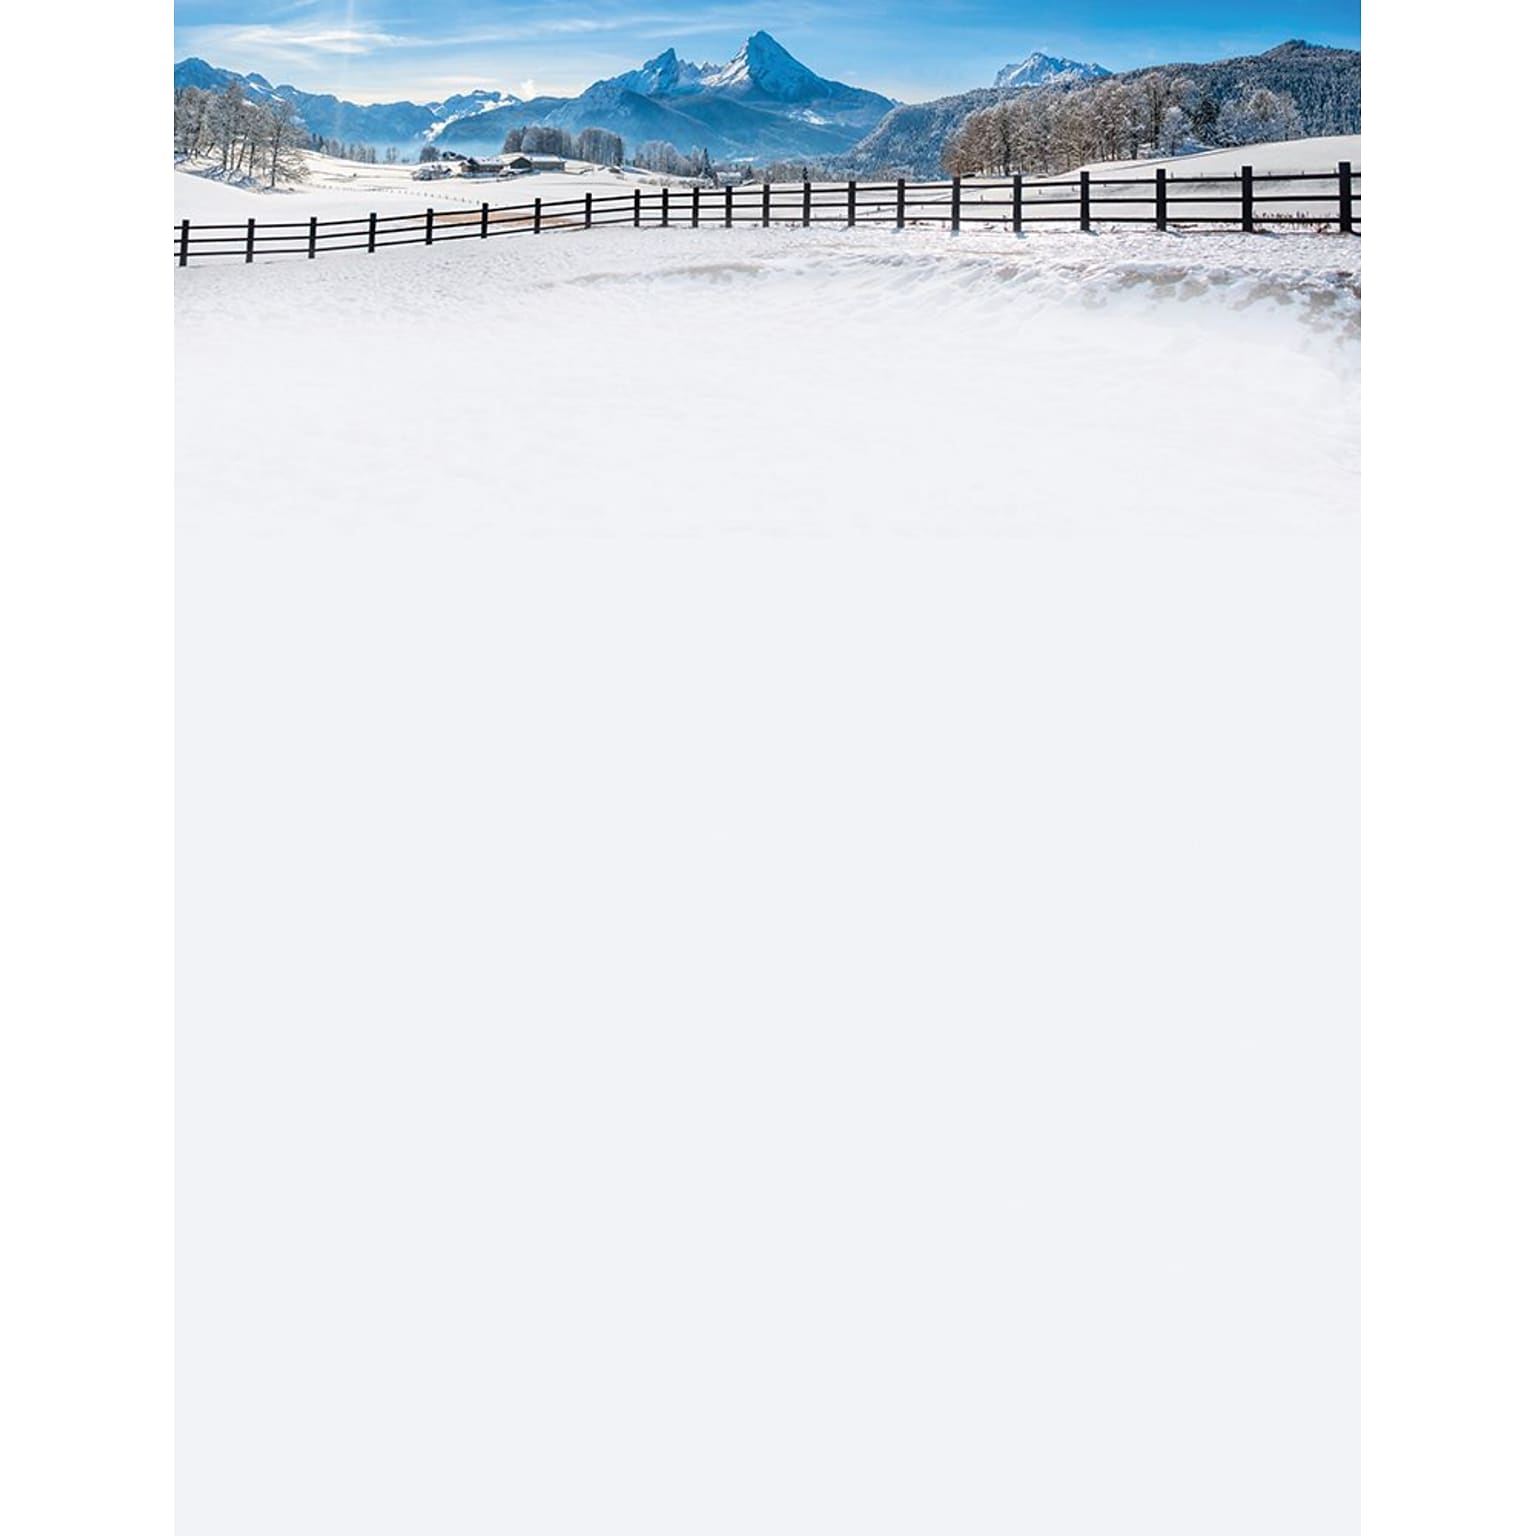 Great Papers!® Holiday Stationery, Winter Fence, 8.5 x 11, 80 Sheets (2017021)